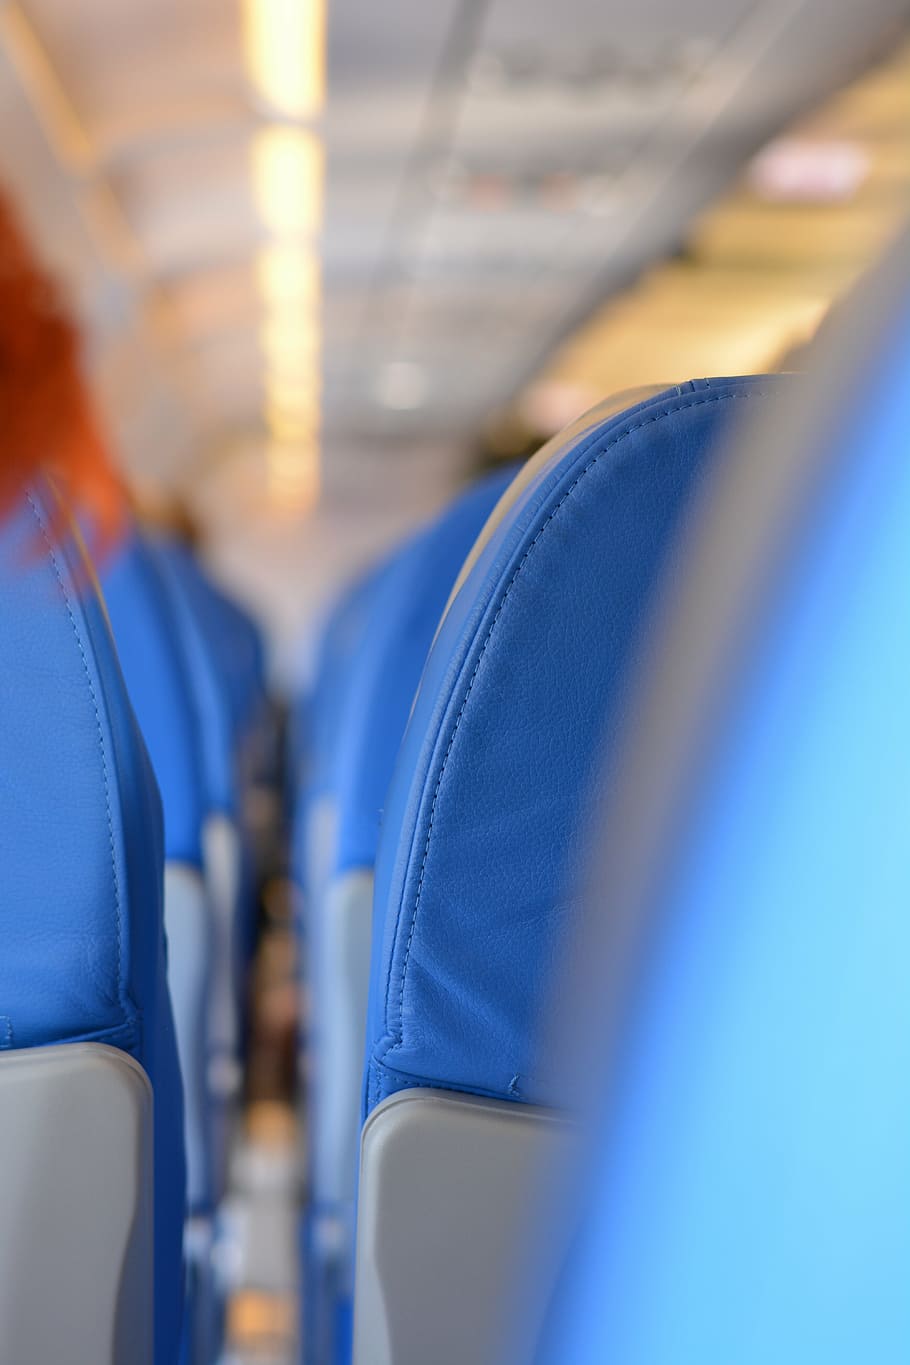 seats, airline, chairs, rows, fly, economy, travel, airliner, transport, interior